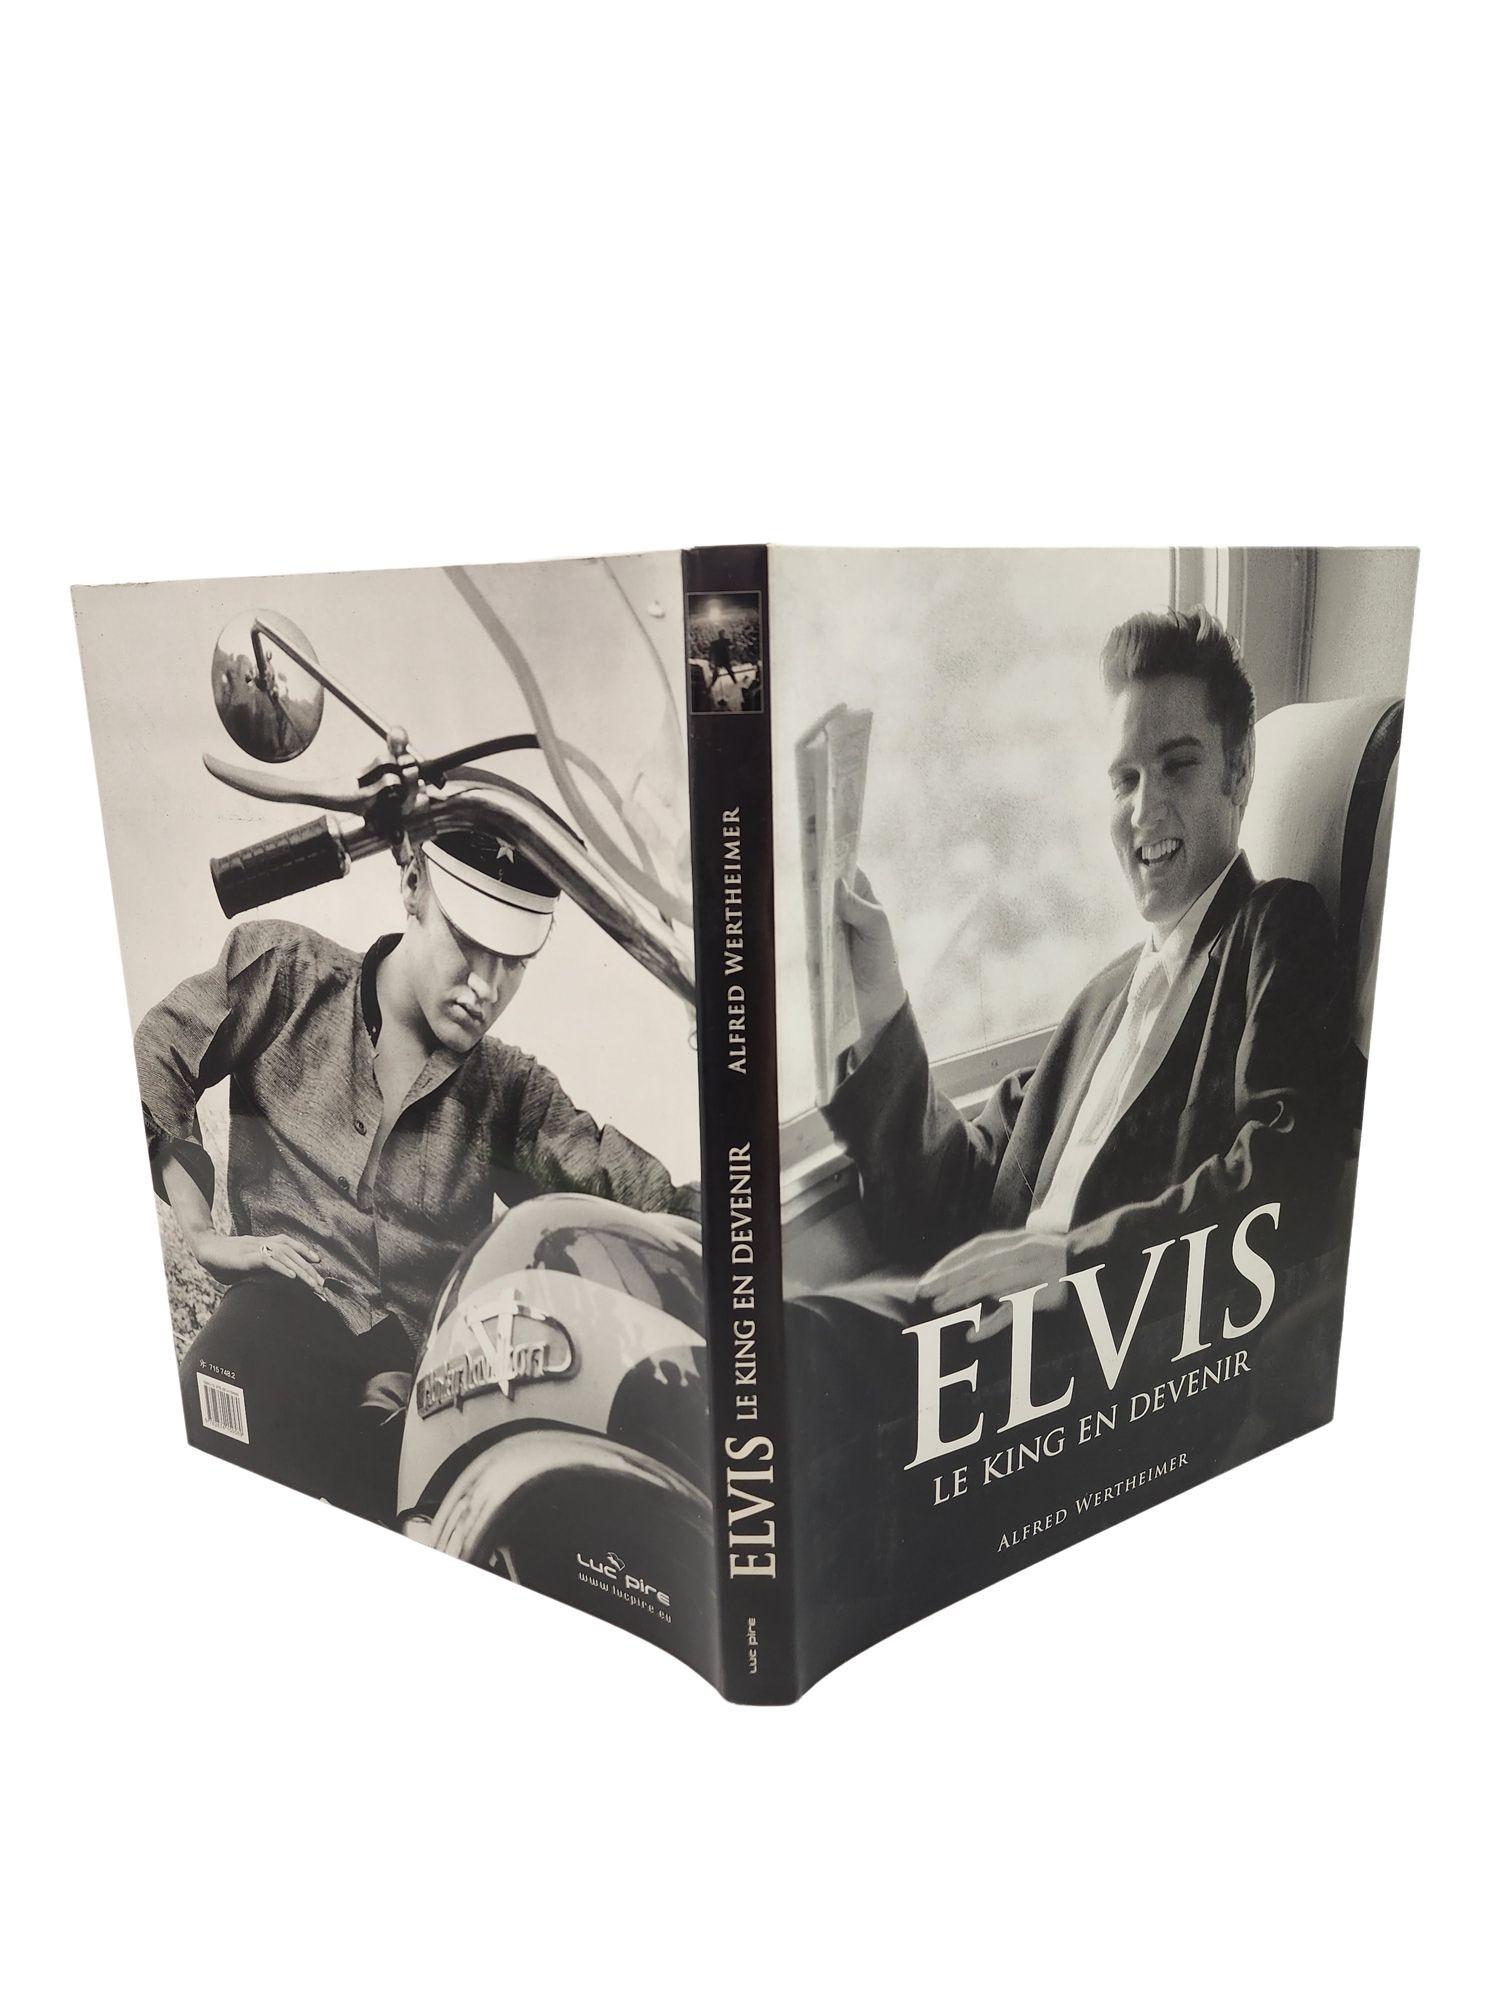 Contemporary ELVIS The King Le King en devenir French edition Hardcover 1st Edition 2006 For Sale